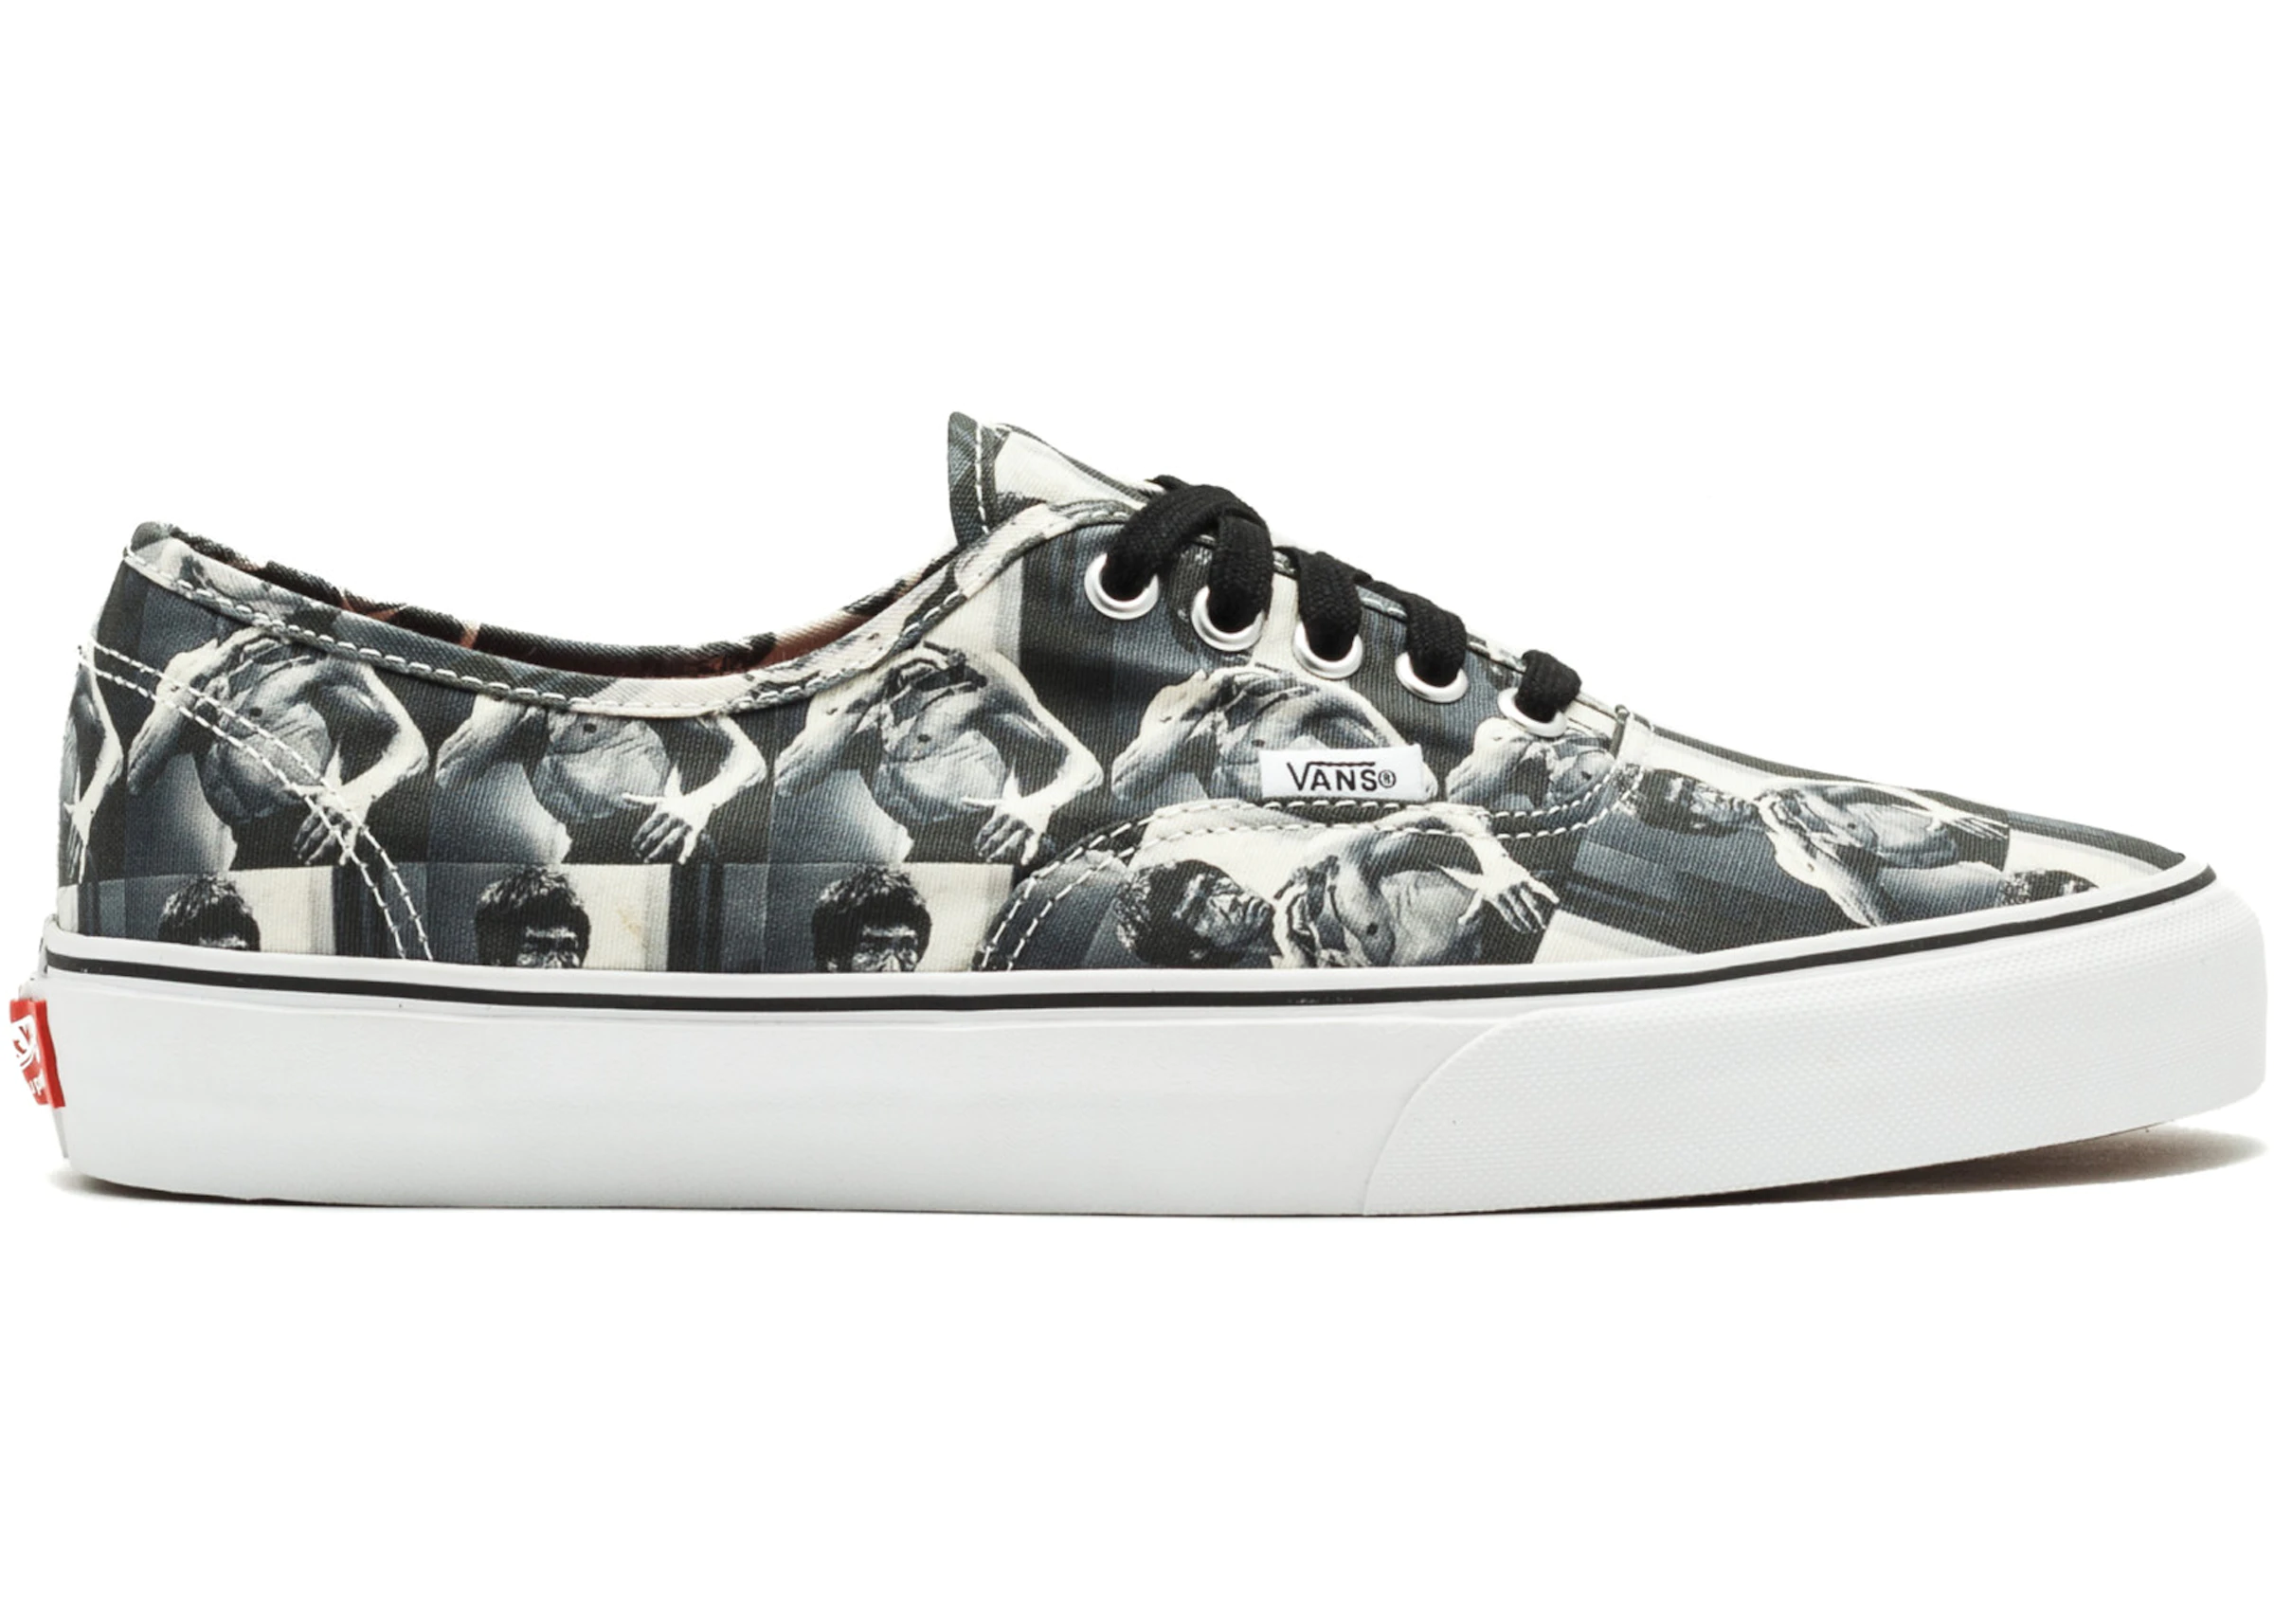 Vans Authentic Supreme Bruce Lee (White) - VN0000ANM - US